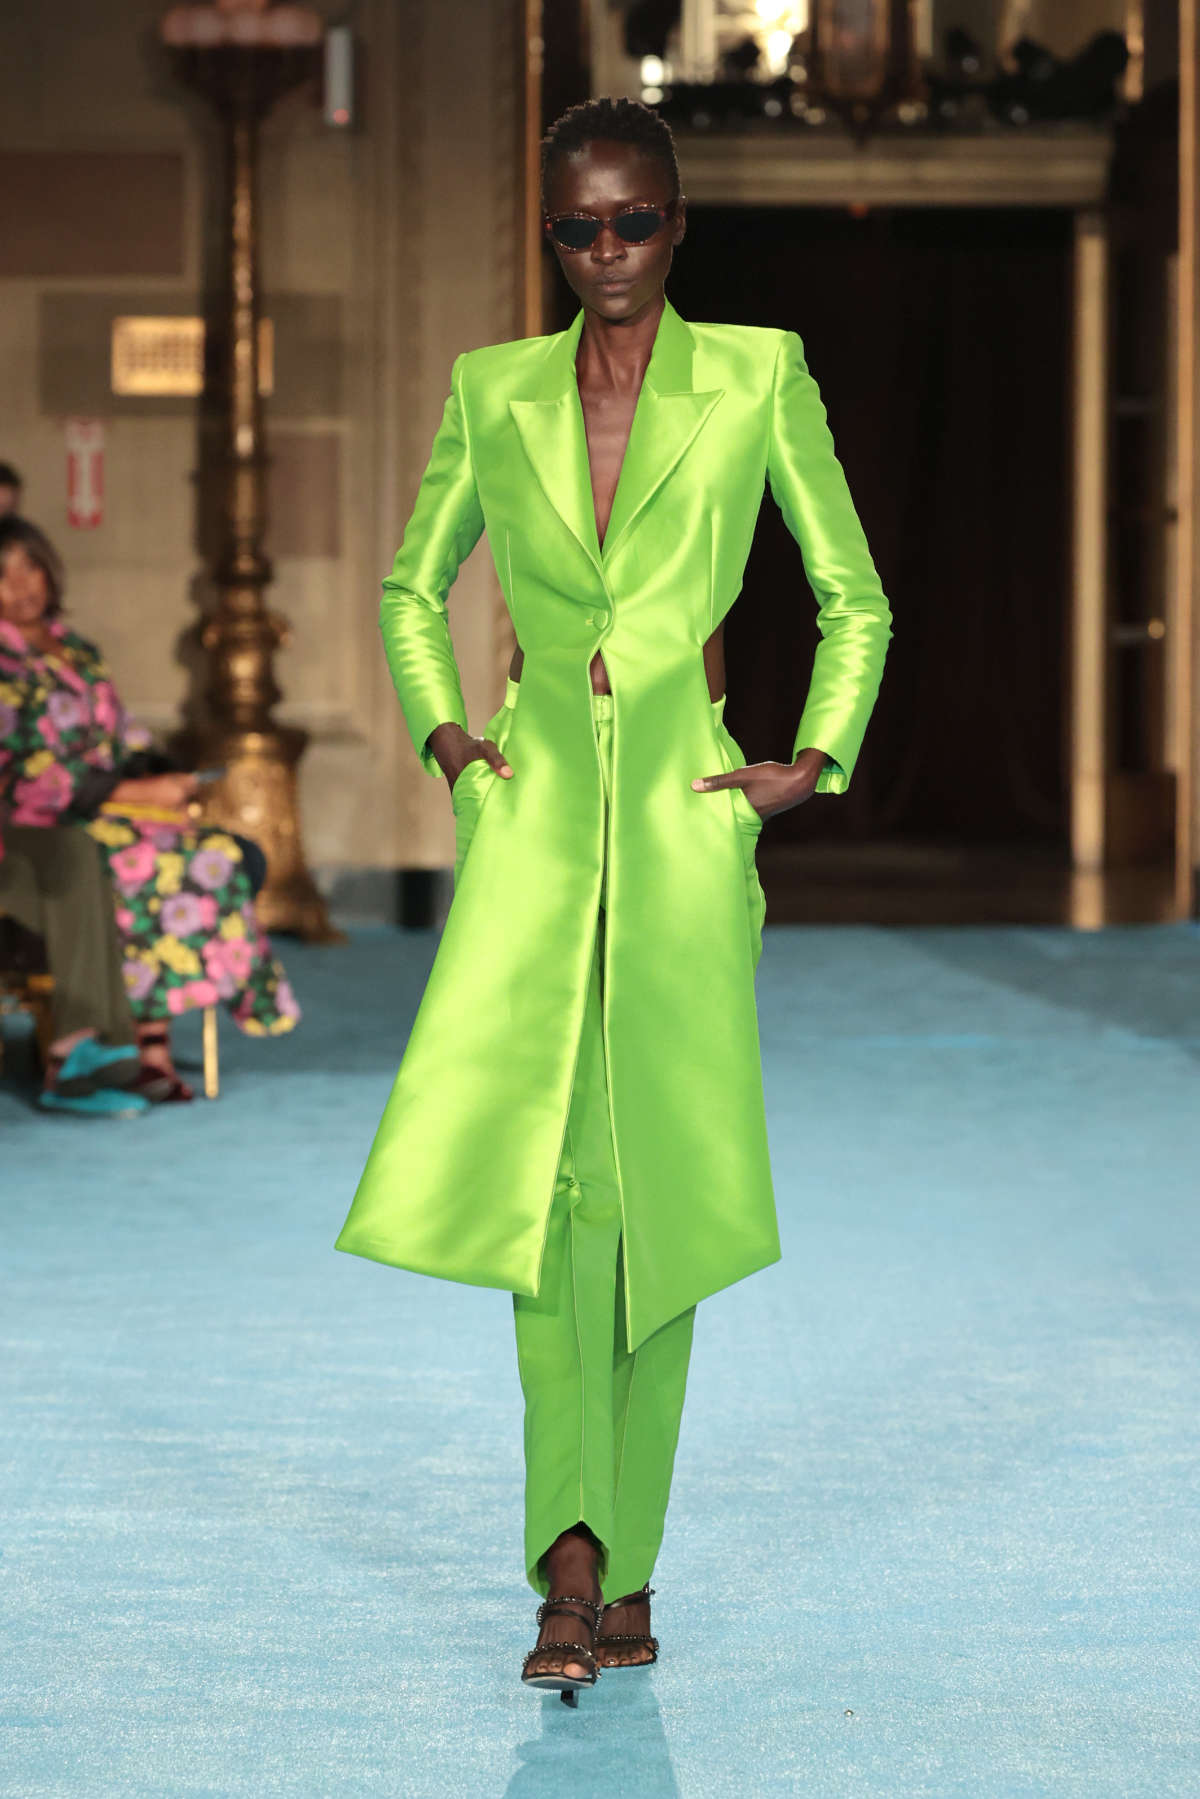 Christian Siriano Presents Its New Spring/Summer 2022 Collection